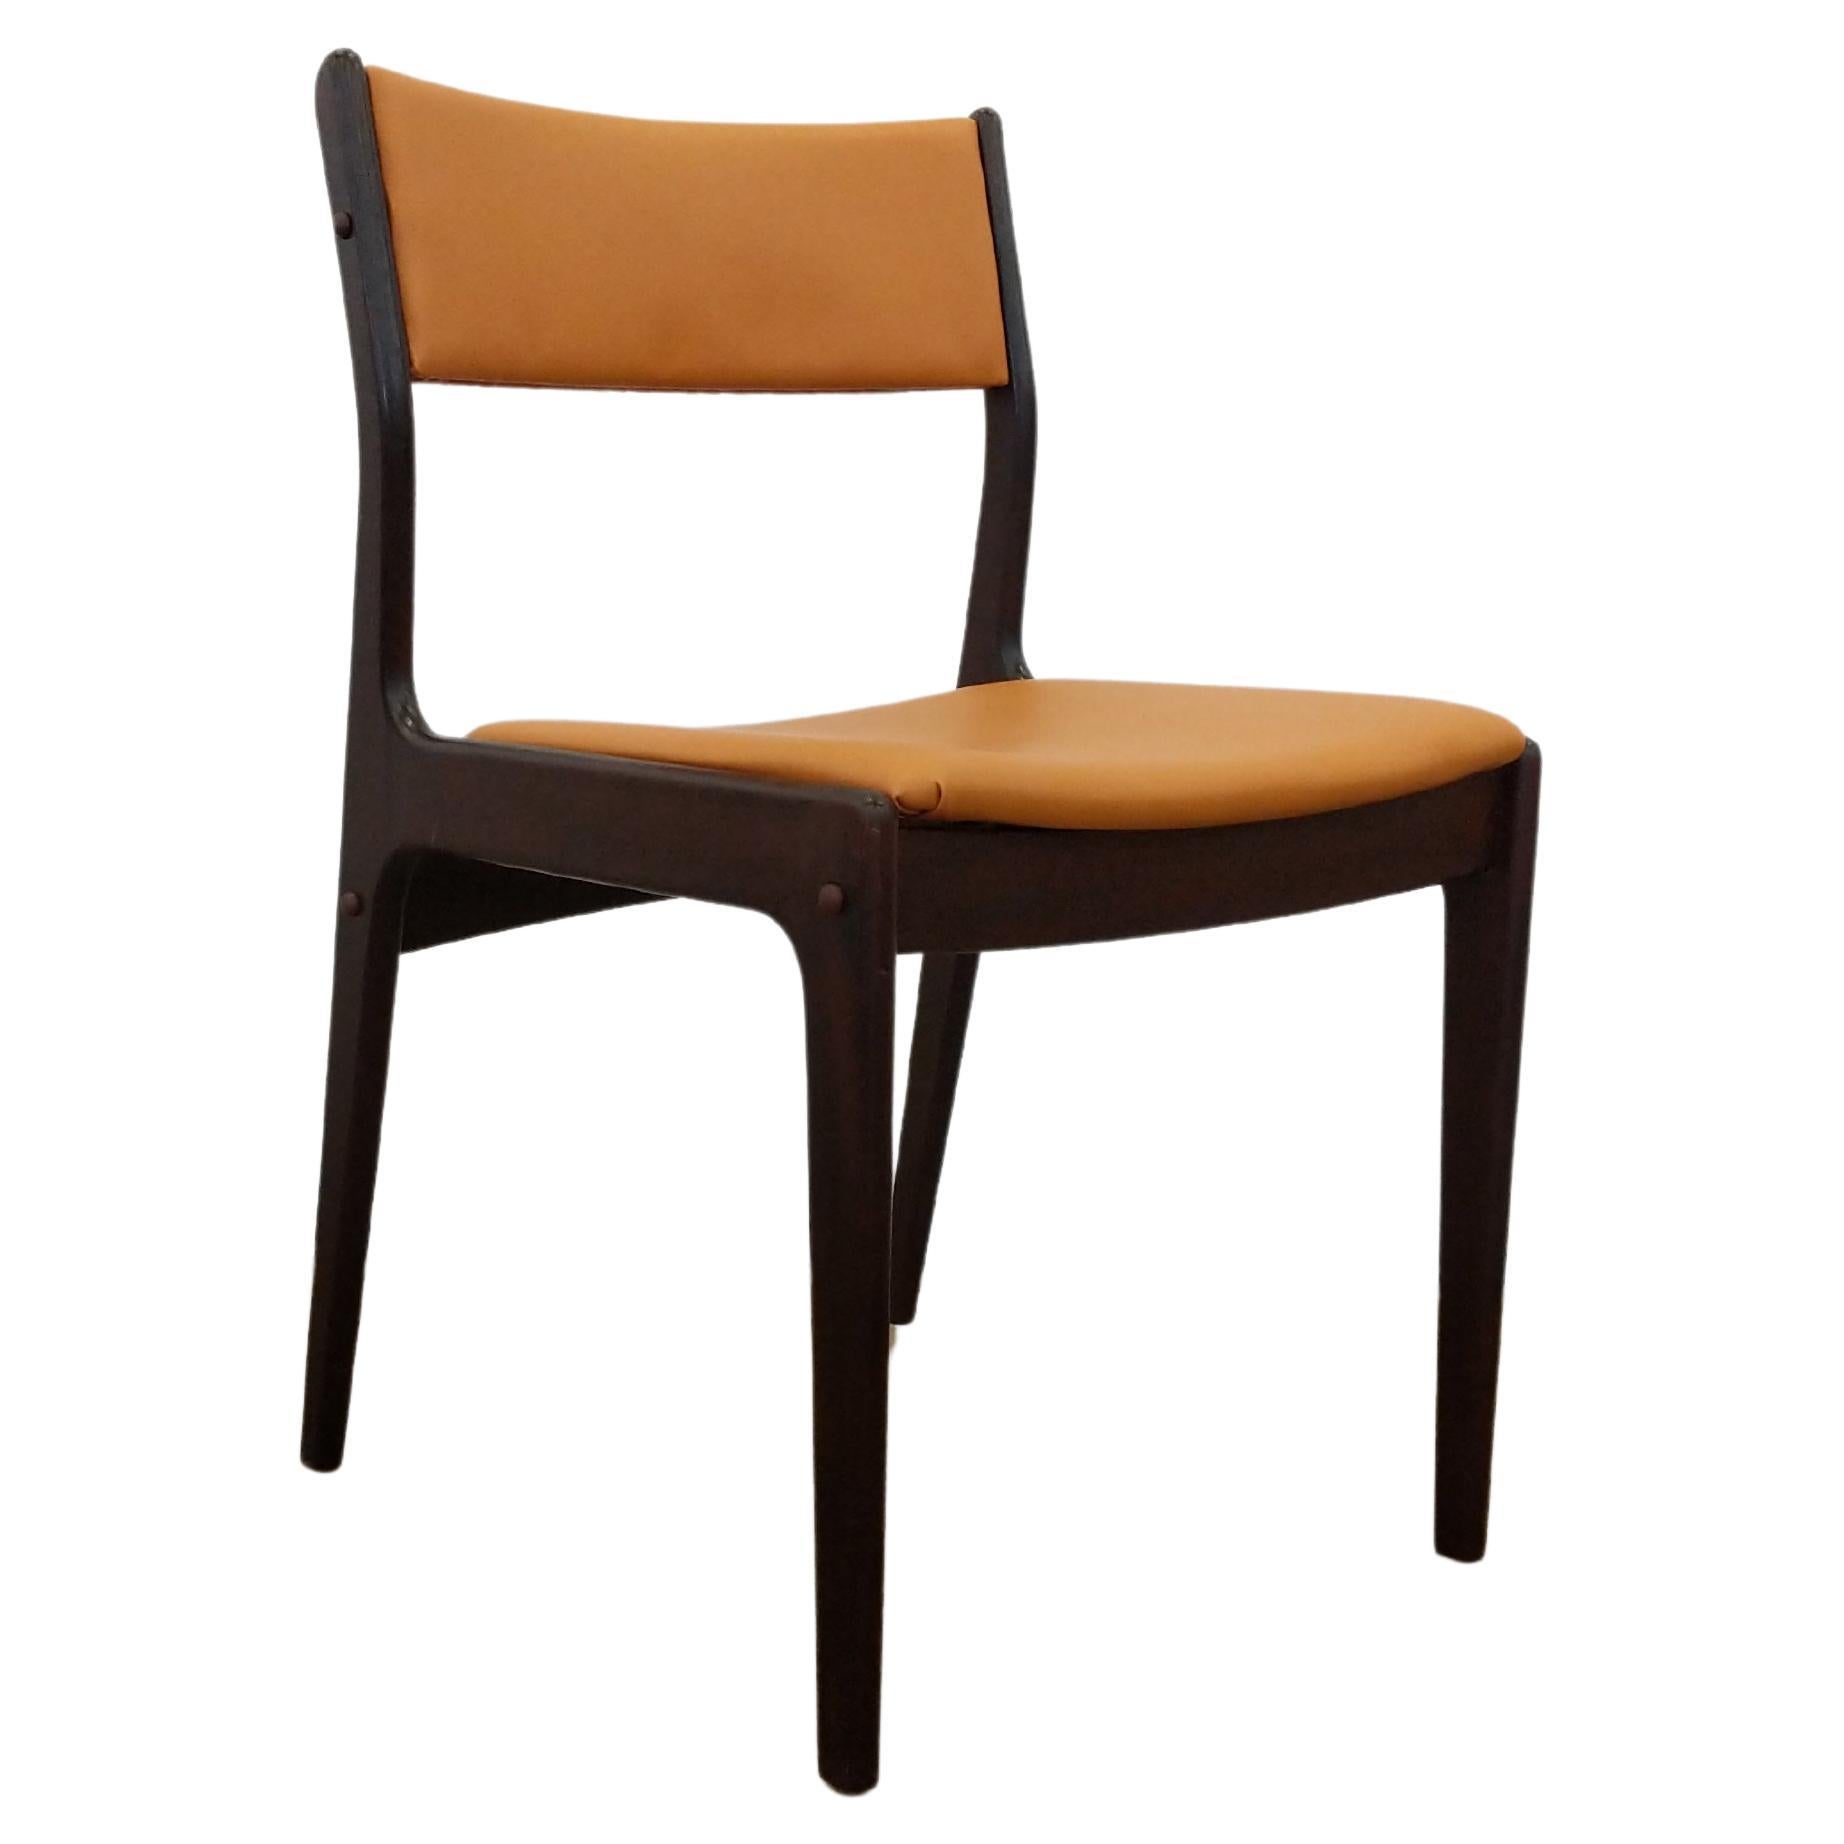 Vintage Danish Mid Century Modern Dining Chair For Sale